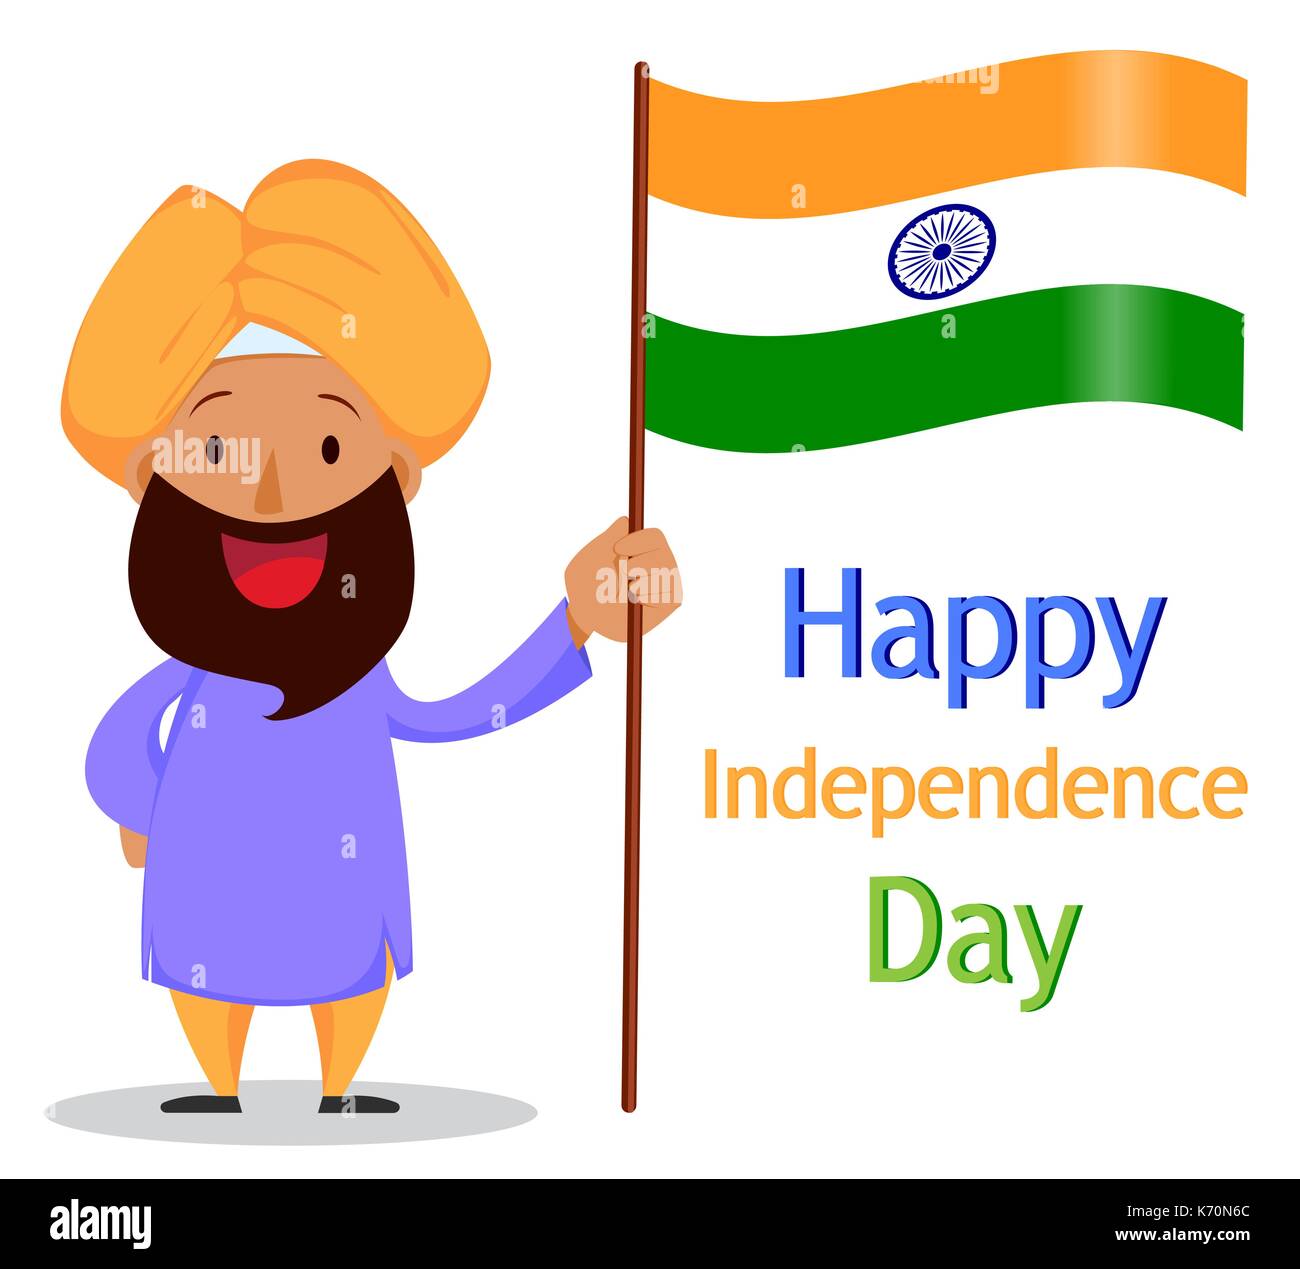 Independence Day in India. Greeting card with funny cartoon character.  Indian bearded man in a turban holding national flag. Vector illustration  Stock Vector Image & Art - Alamy